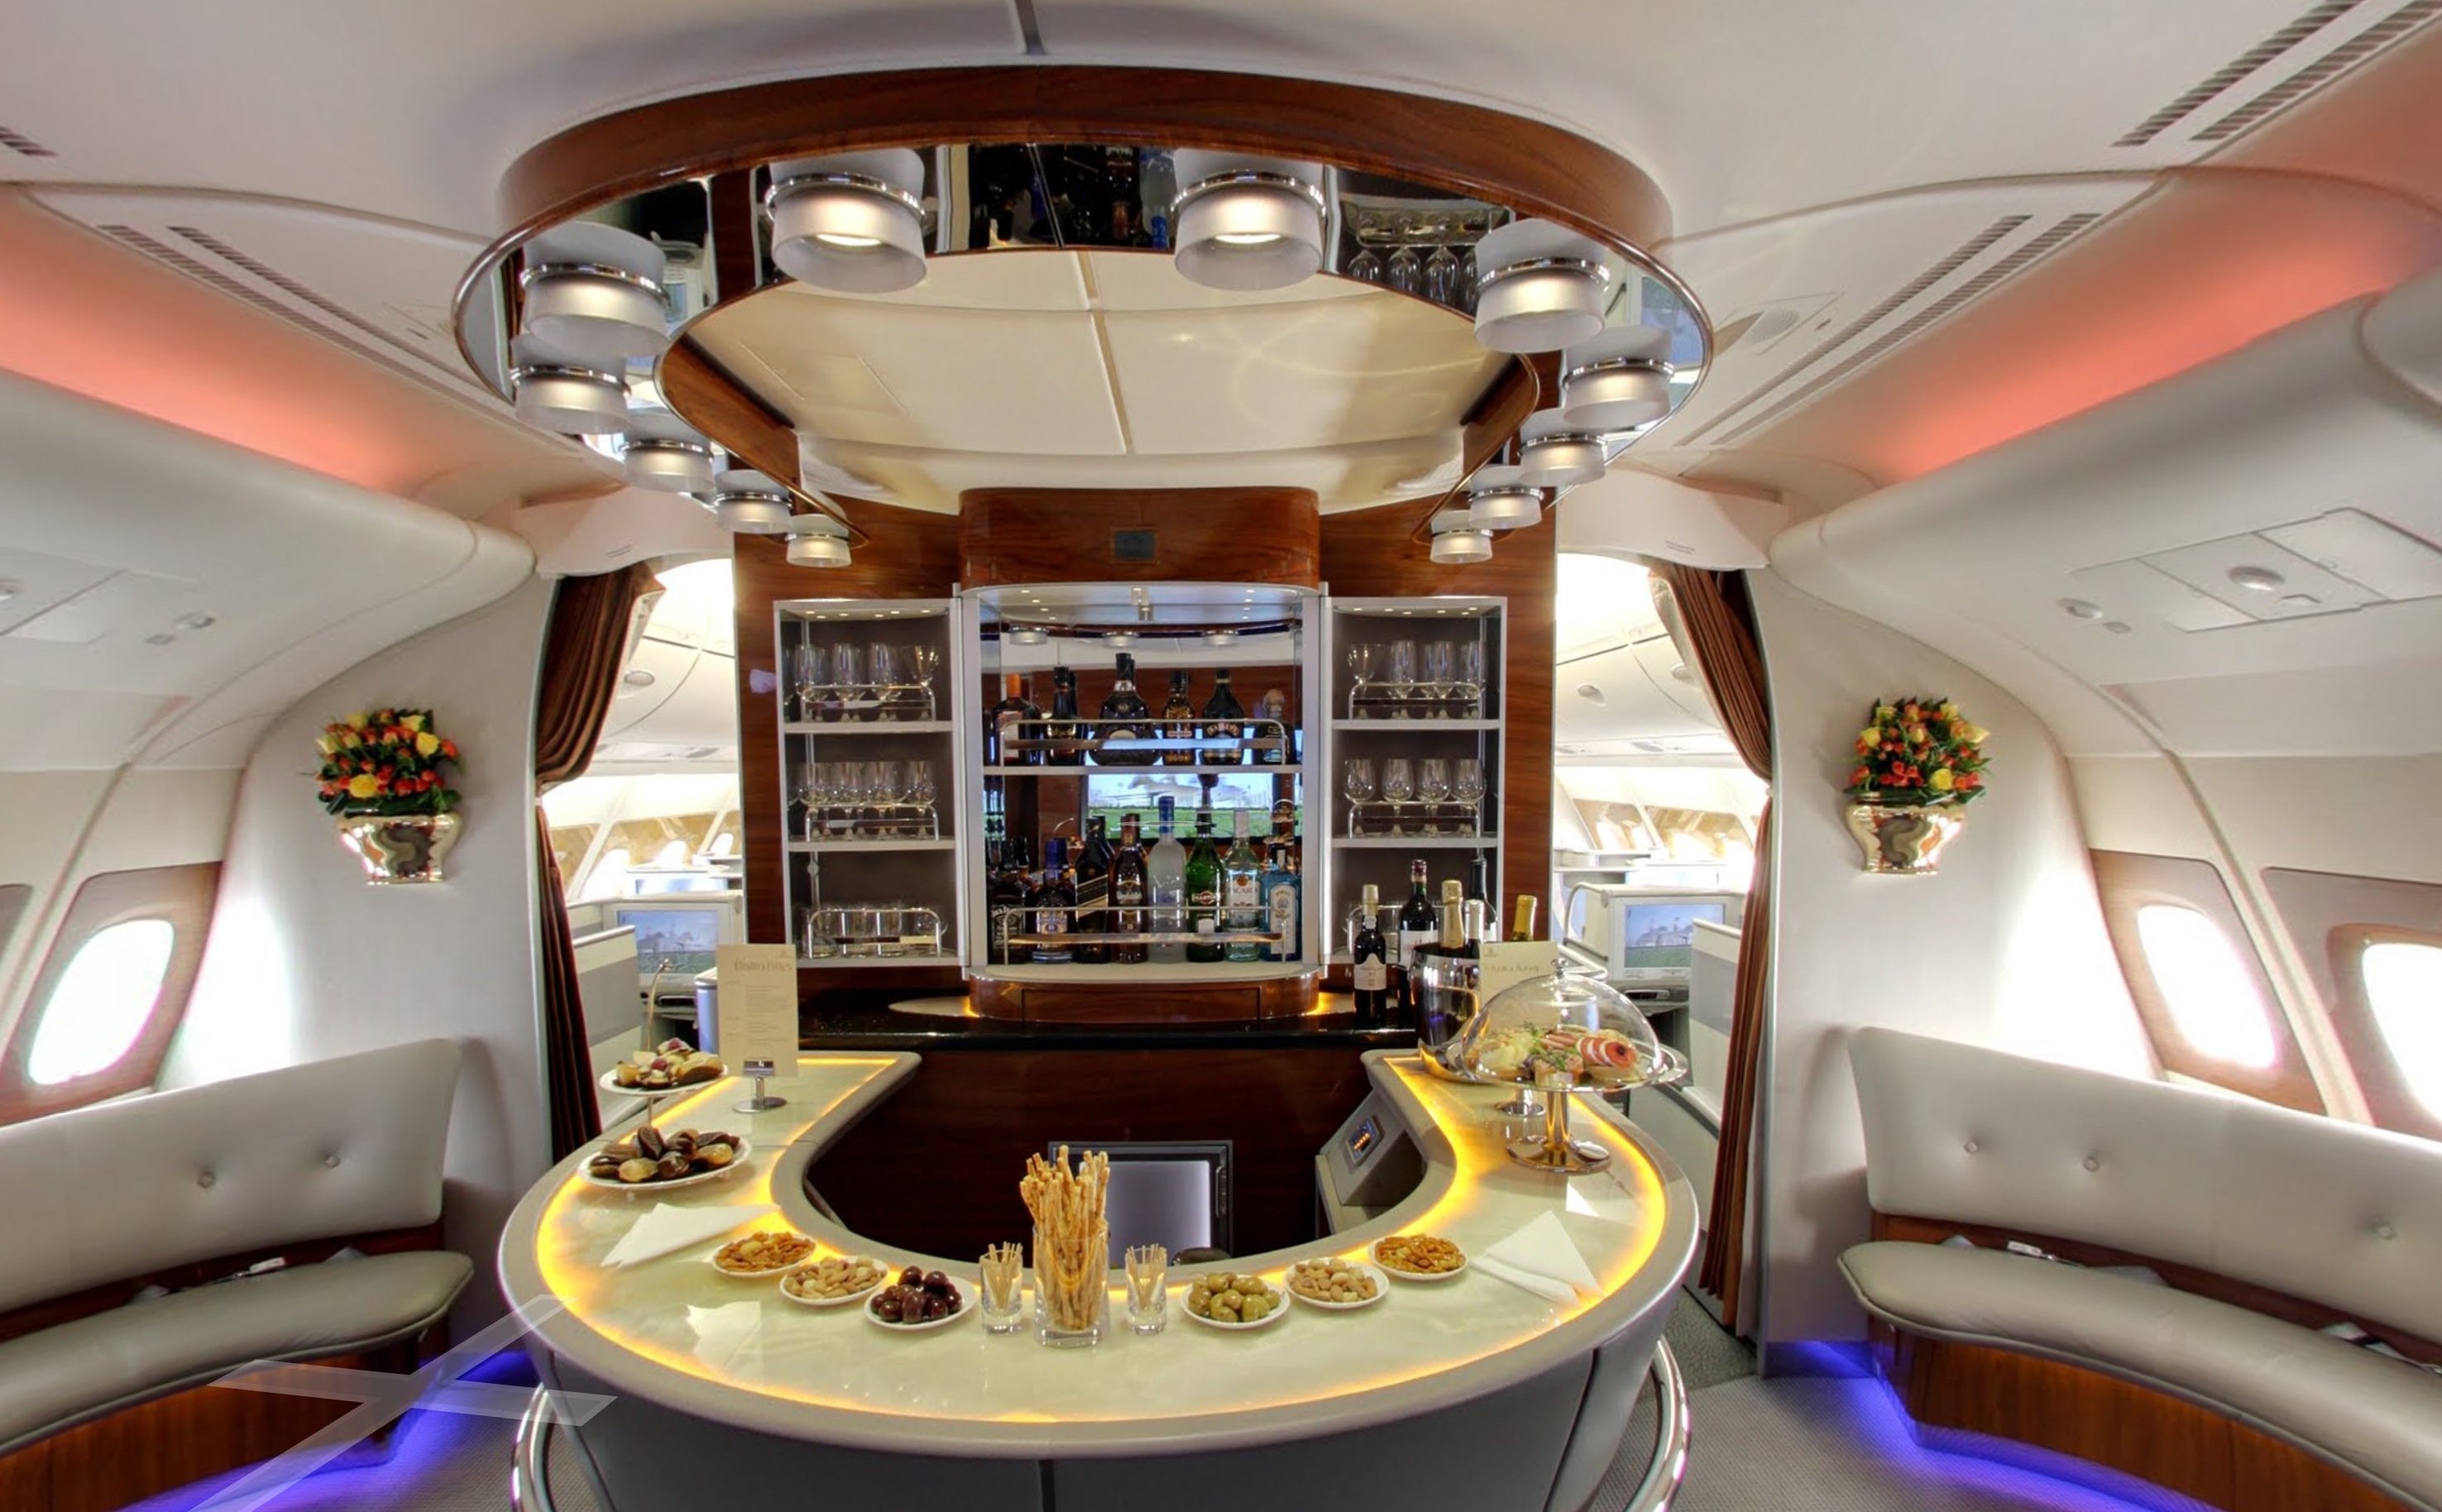 Google Street View now lets you explore the inside of the huge Airbus